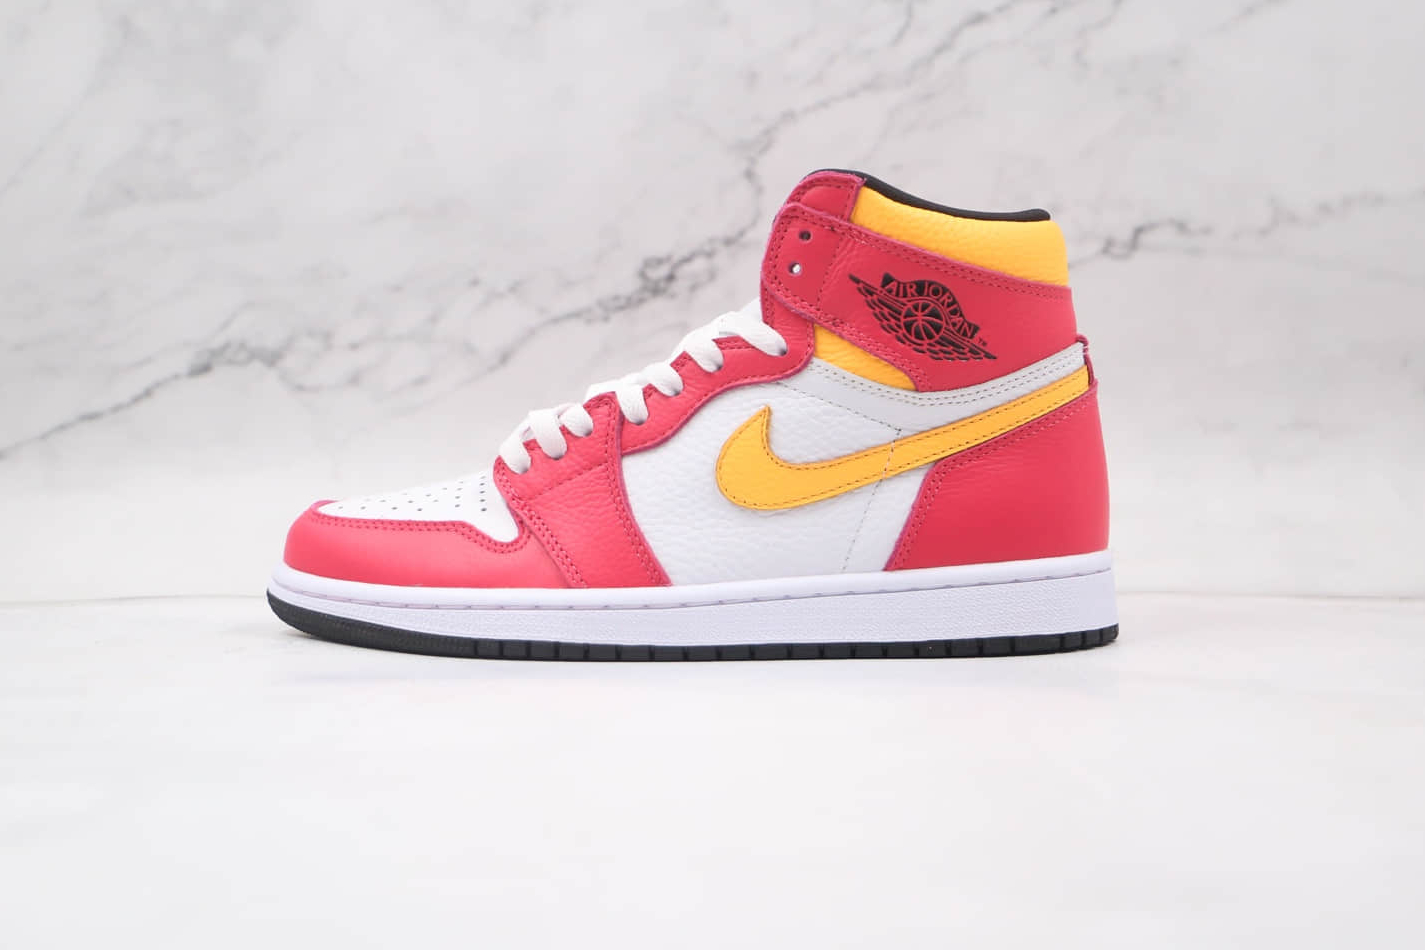 Air Jordan 1 Retro High OG 'Light Fusion Red' - Stylish Sneakers for Ultimate Comfort - Limited Edition Release